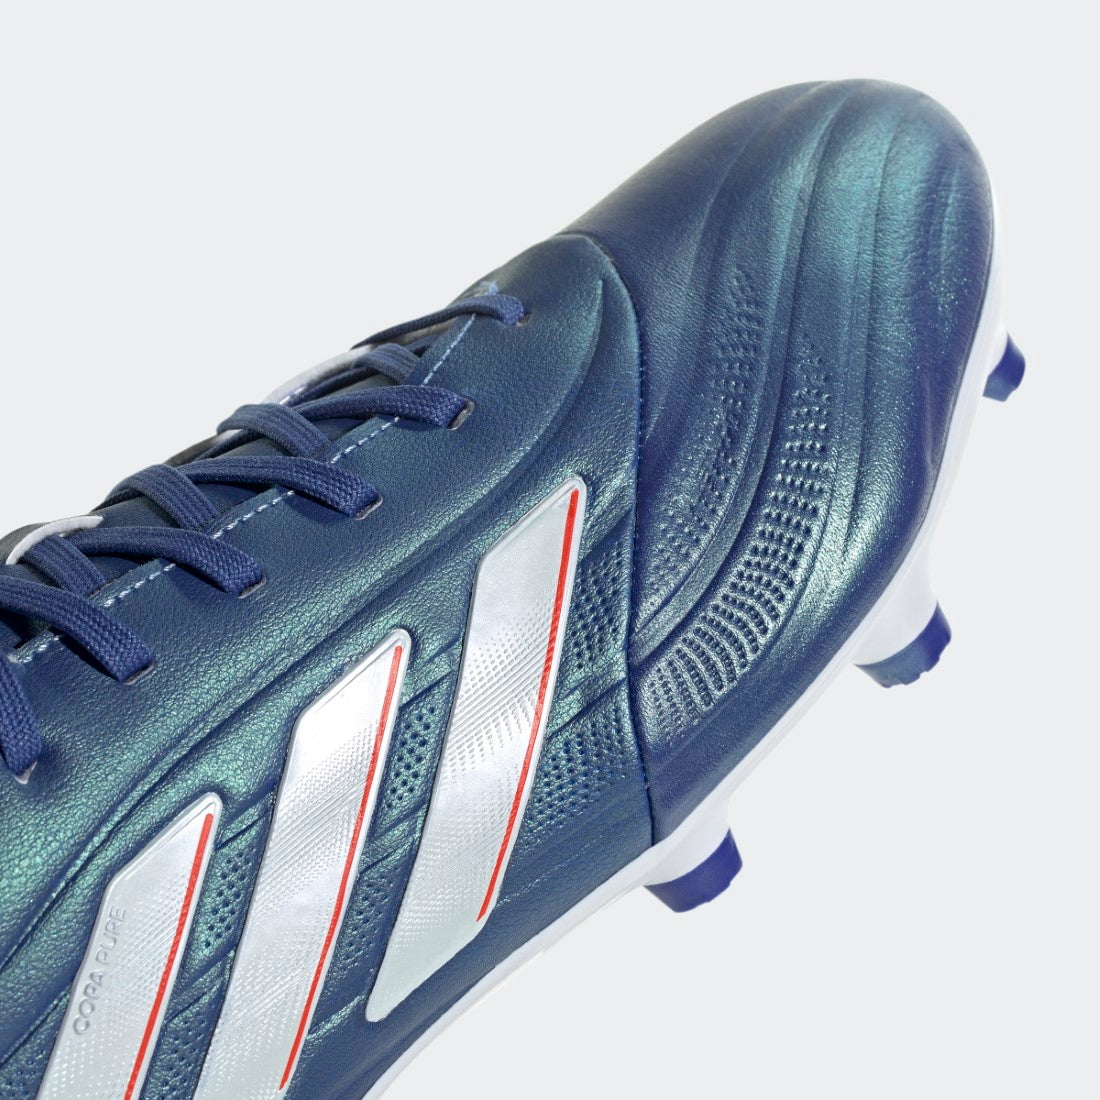 Copa Pure II.3 Firm Ground Boots